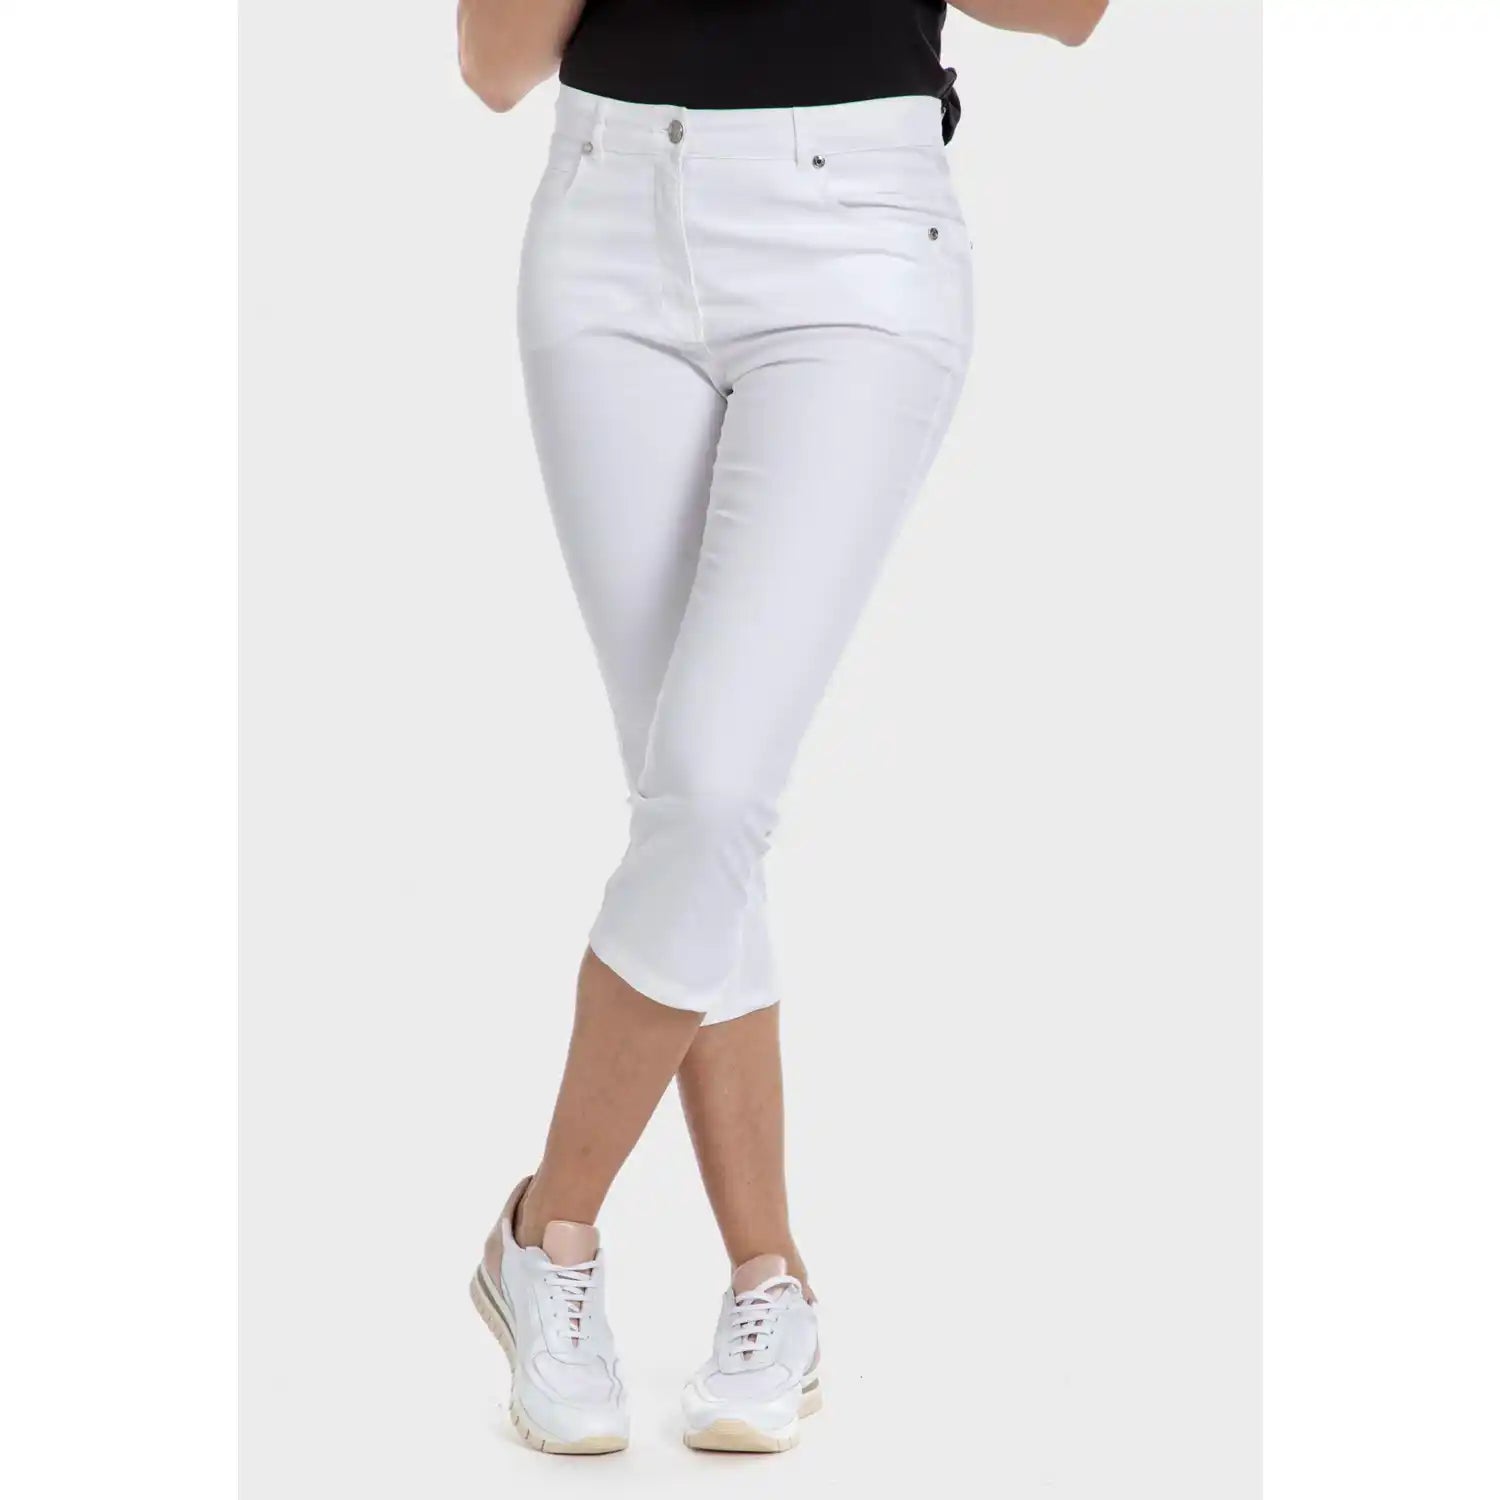 Punt Roma Cotton Crop Trousers - White 1 Shaws Department Stores